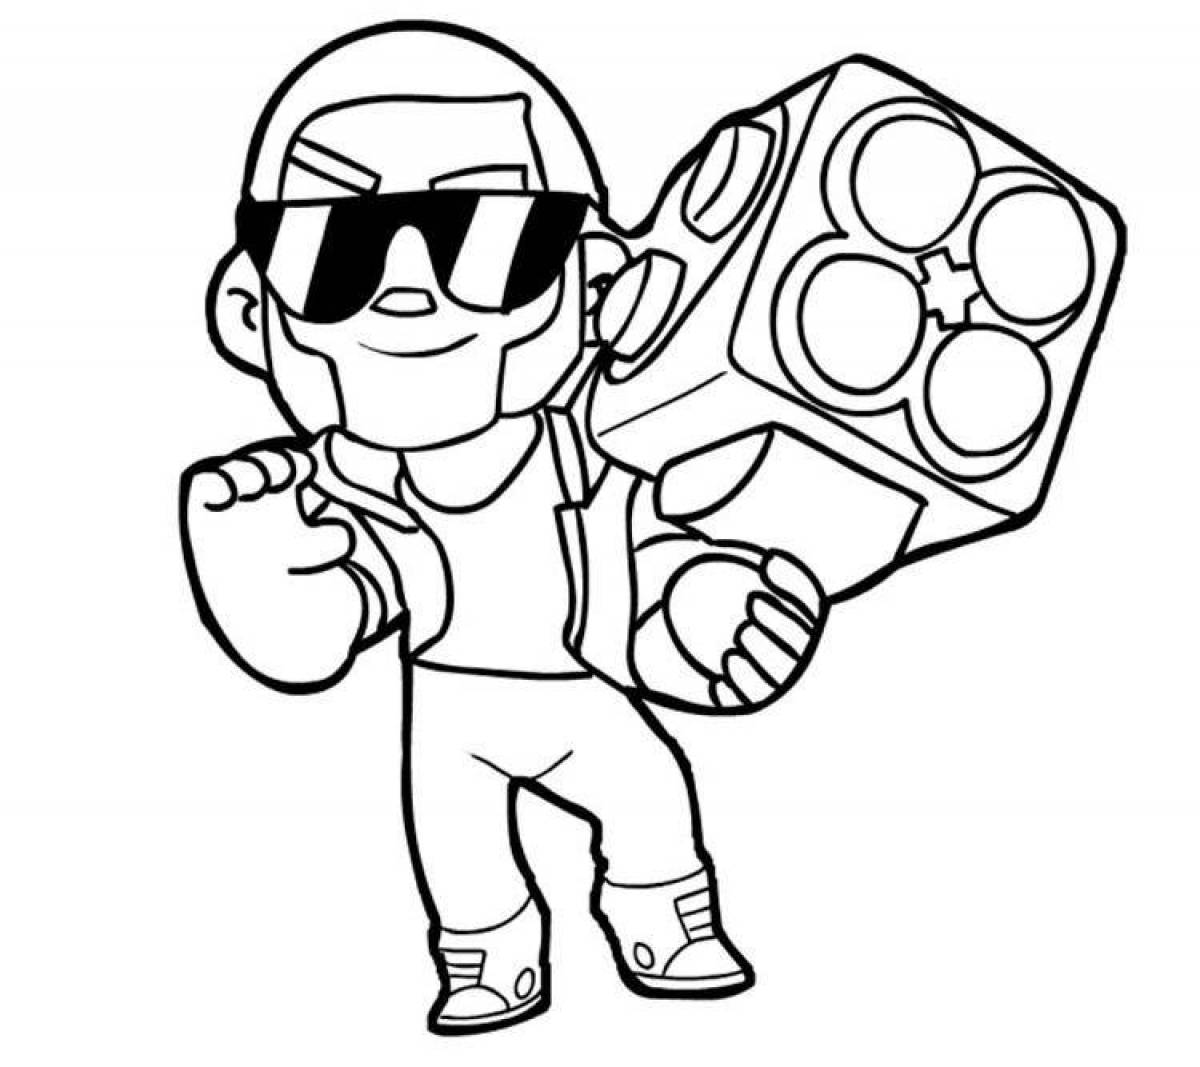 Color-lively brock coloring page